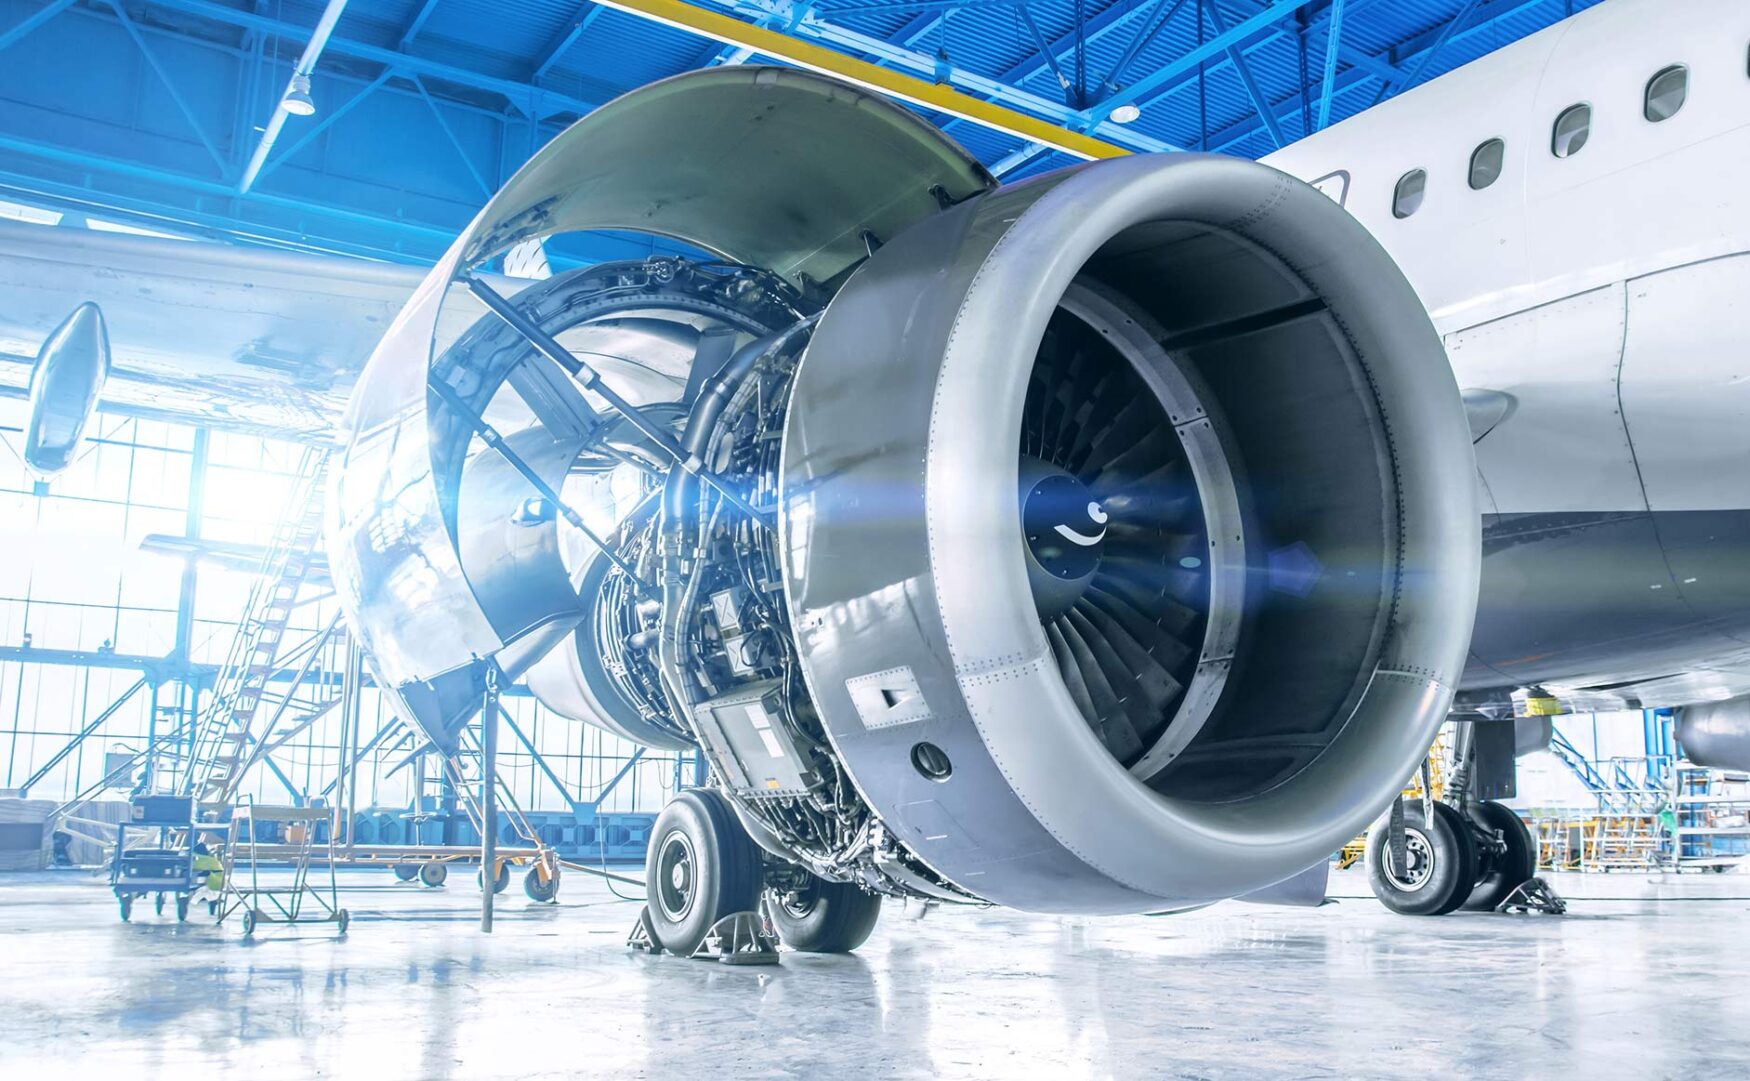 Nearshoring is key for aerospace suppliers: FEMIA